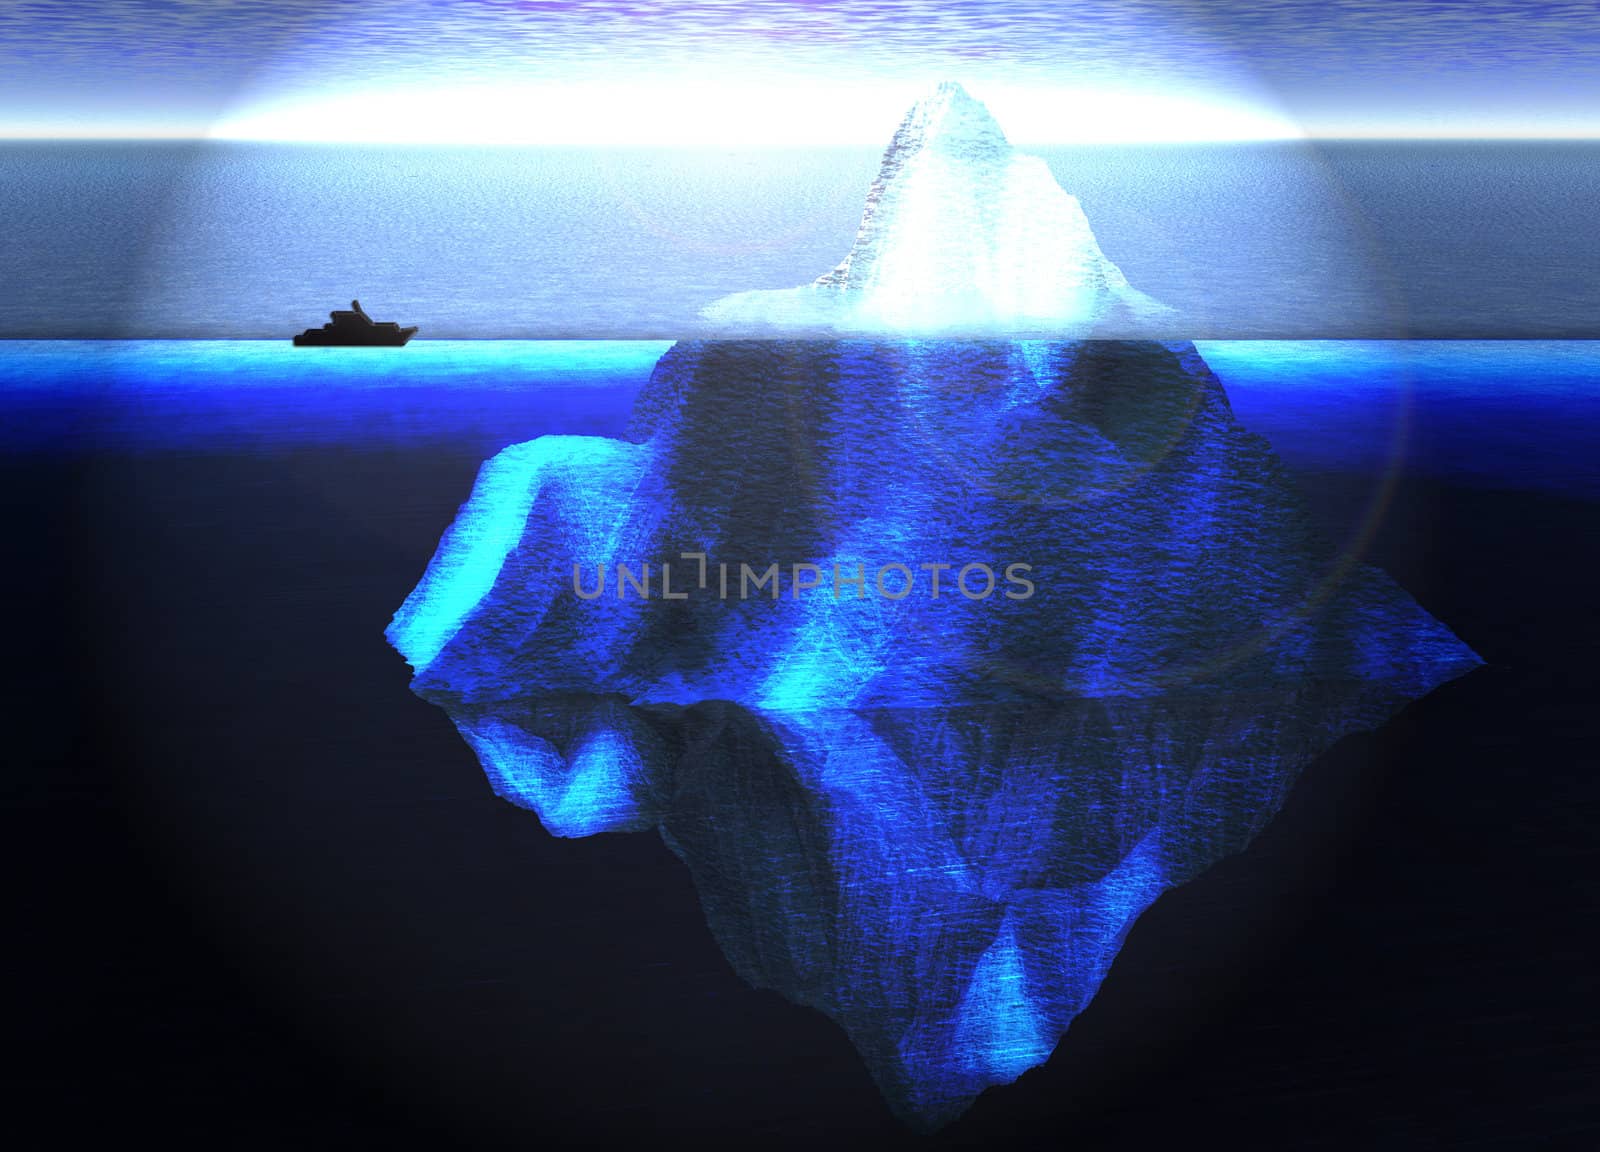 Floating Iceberg in the Open Ocean with Small Boat Nearby Illust by bobbigmac